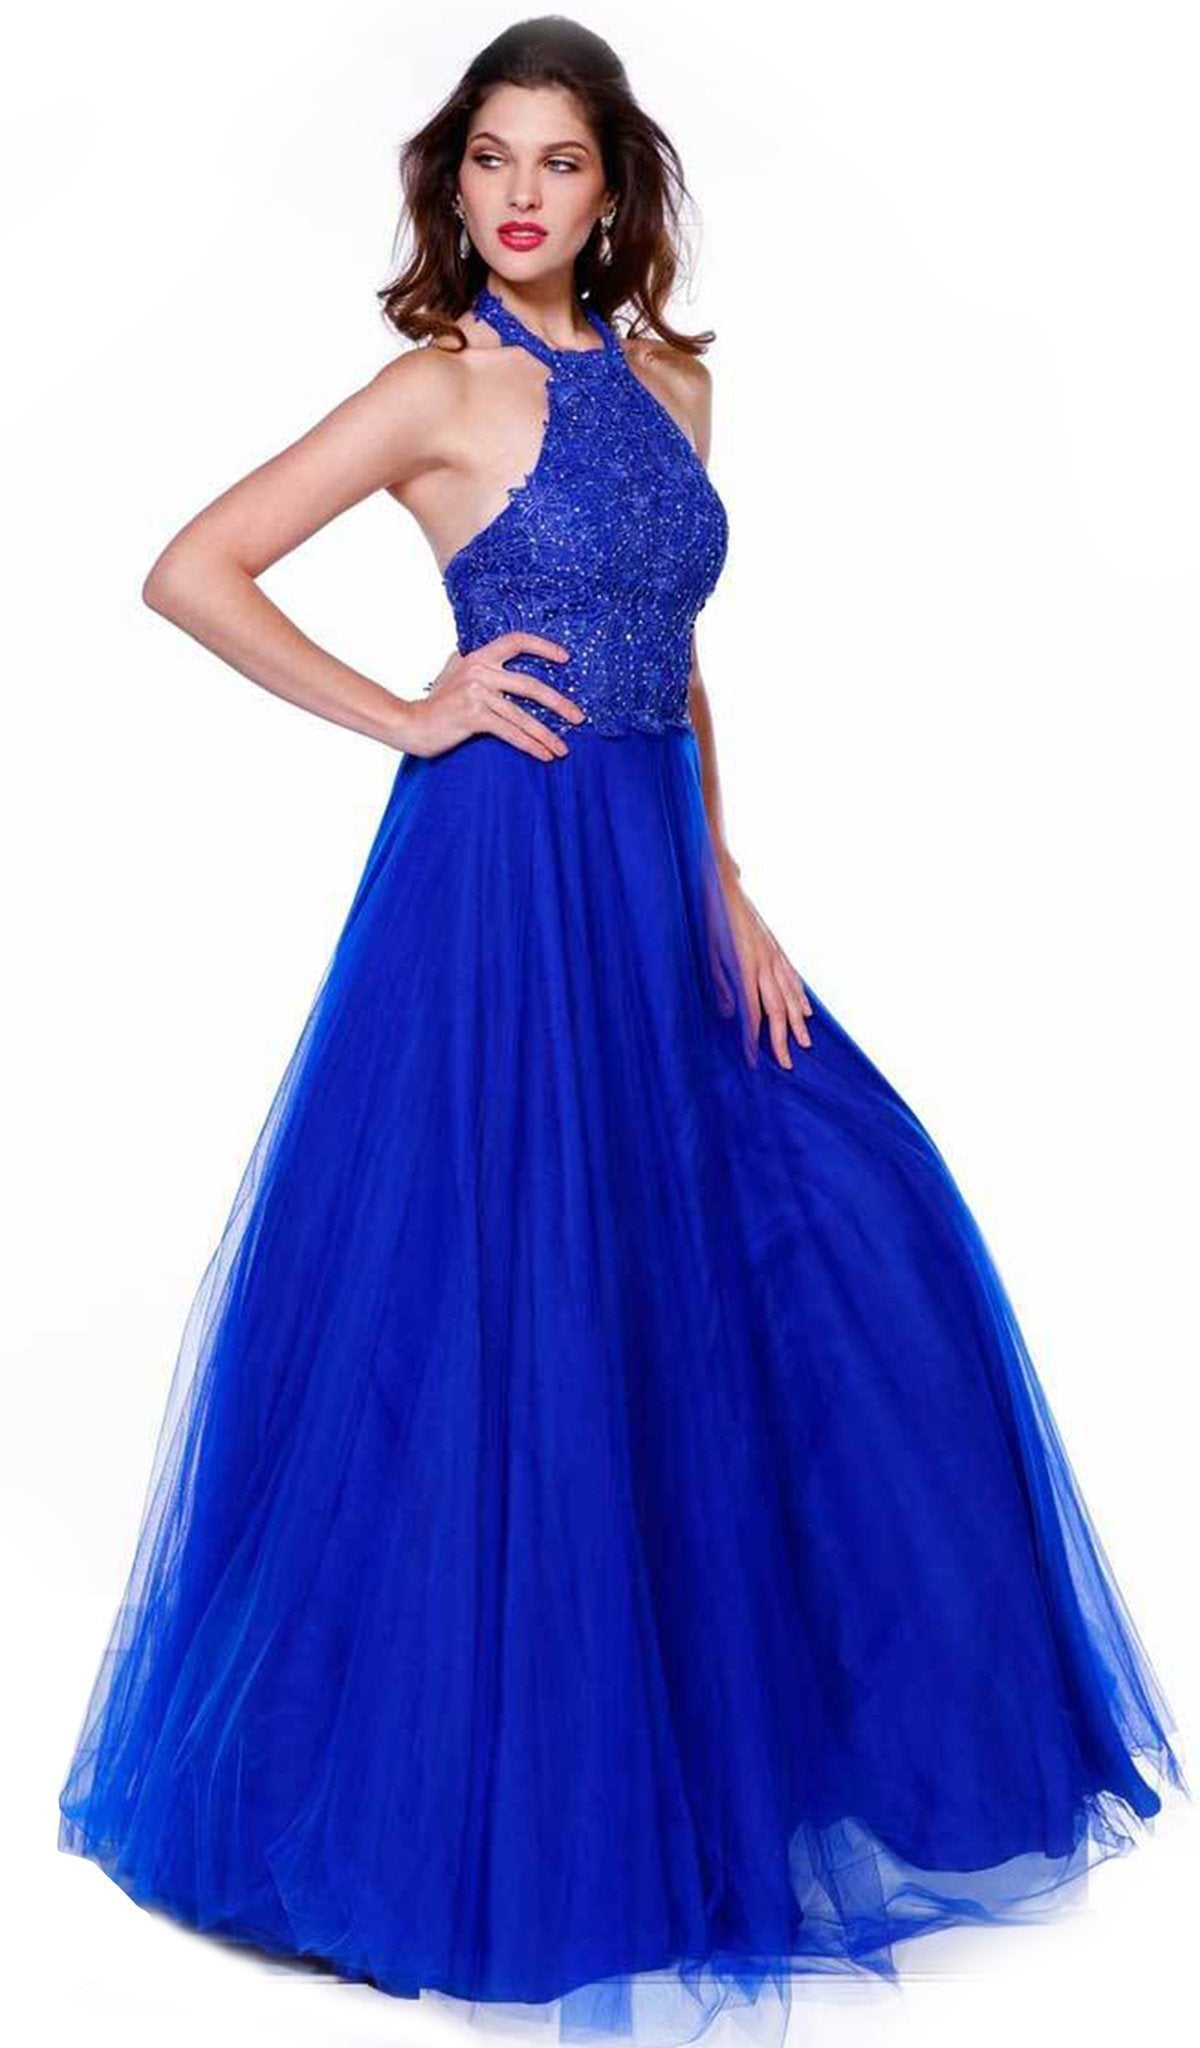 Nox Anabel - 8181 Lace Embroidered Bodice Halter Long Gown Special Occasion Dress XS / Royal Blue